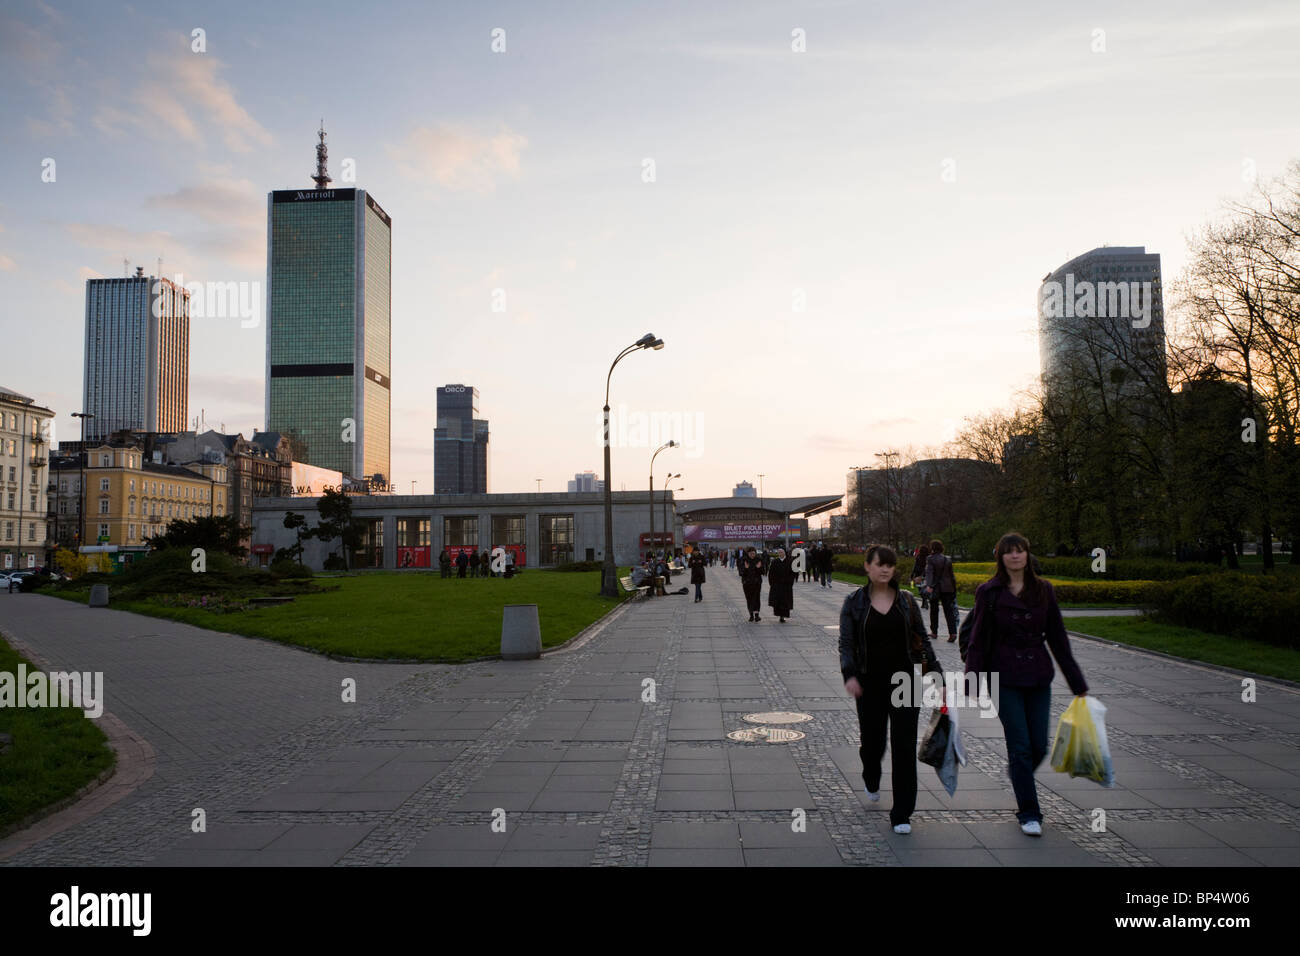 People walking from 'Warsaw Central Rail Station' on 'Parade Square' (Plac Defilad), Warsaw Poland. Stock Photo